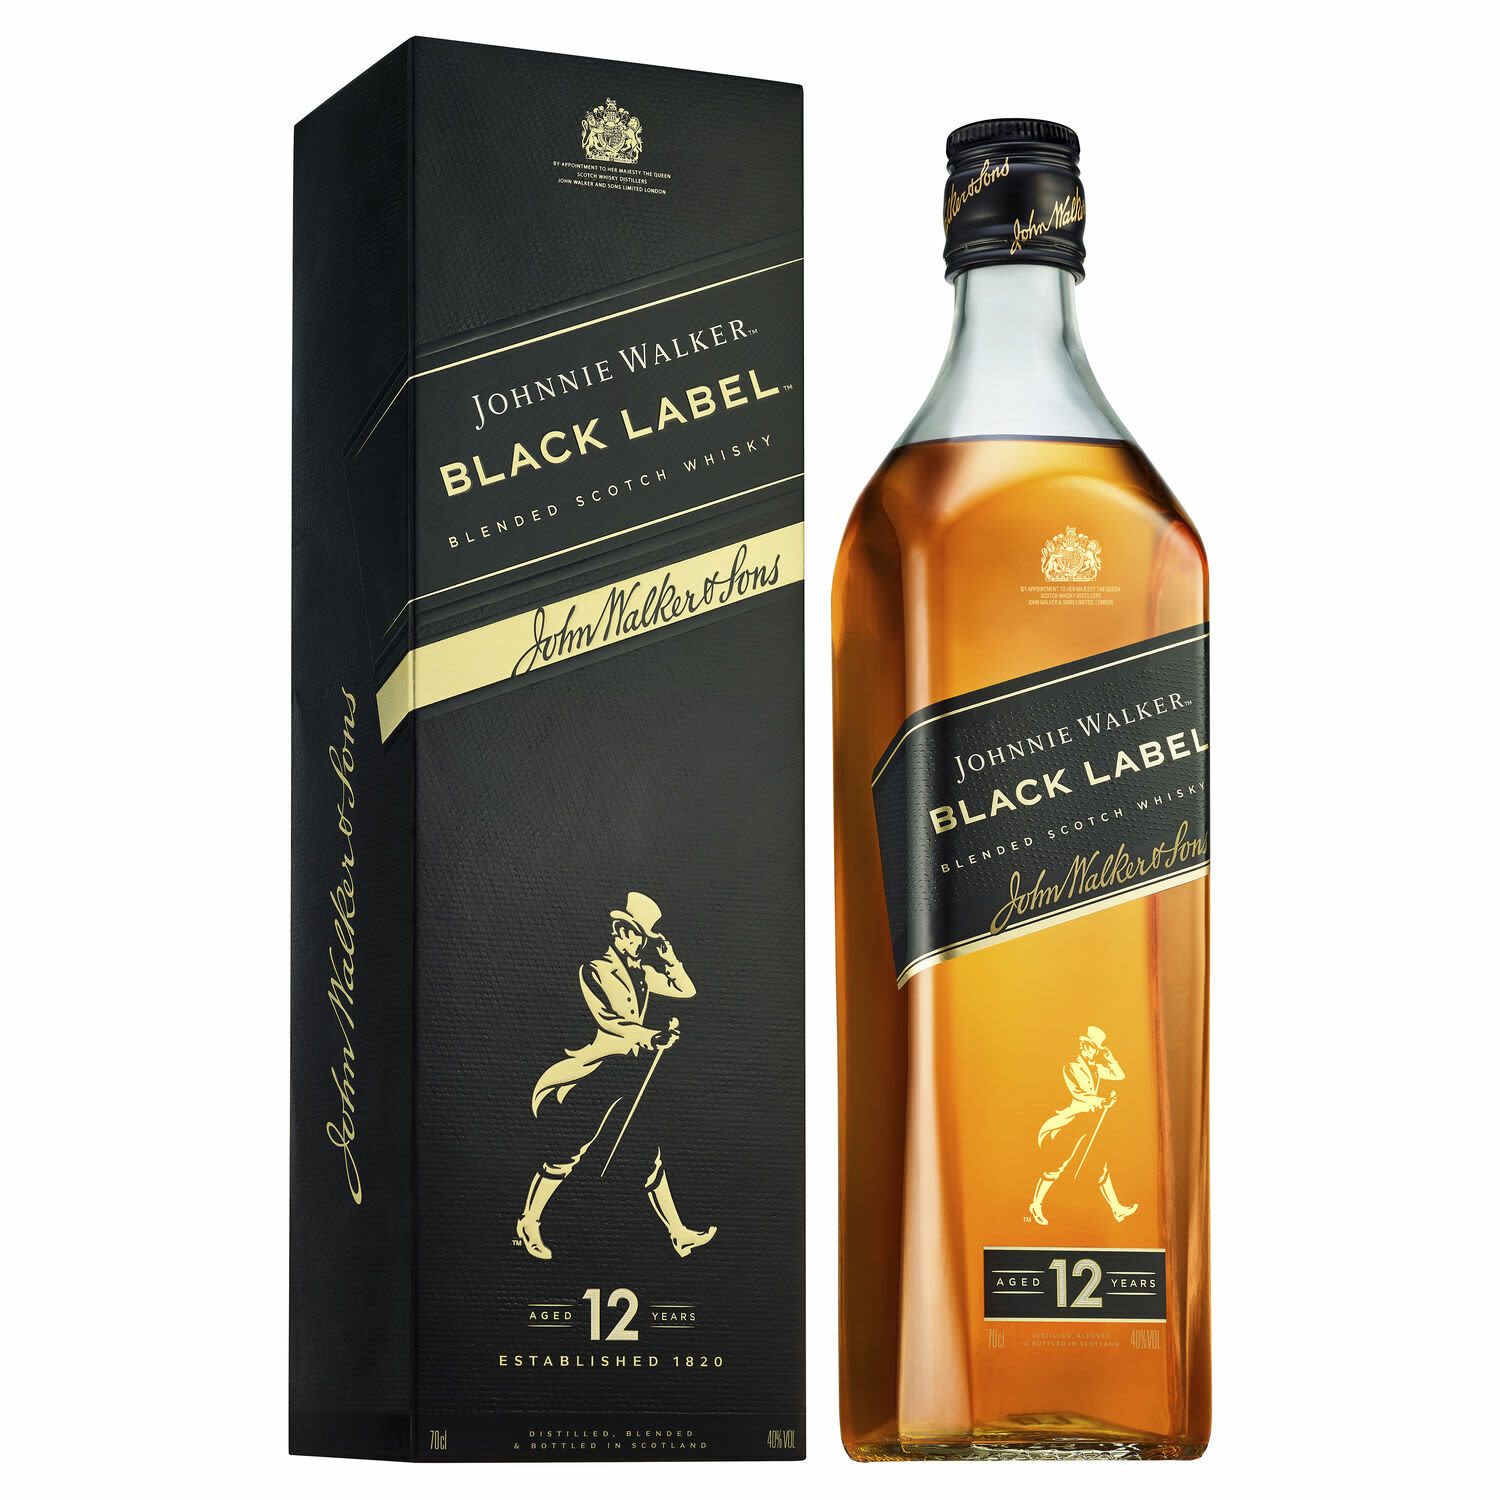 Johnnie Walker Black Label is one of the worlds most popular whiskies. 'Johnnie Black' is aged for 12 years, which mellows the aromas and flavours of this iconic spirit quite magnificently. Smoother, more intense and a genuine pleasure to have in your glass; it makes for a fantastic gift for anyone.<br /> <br />Alcohol Volume: 40.00%<br /><br />Pack Format: Bottle<br /><br />Standard Drinks: 22</br /><br />Pack Type: Bottle<br /><br />Country of Origin: Scotland<br />